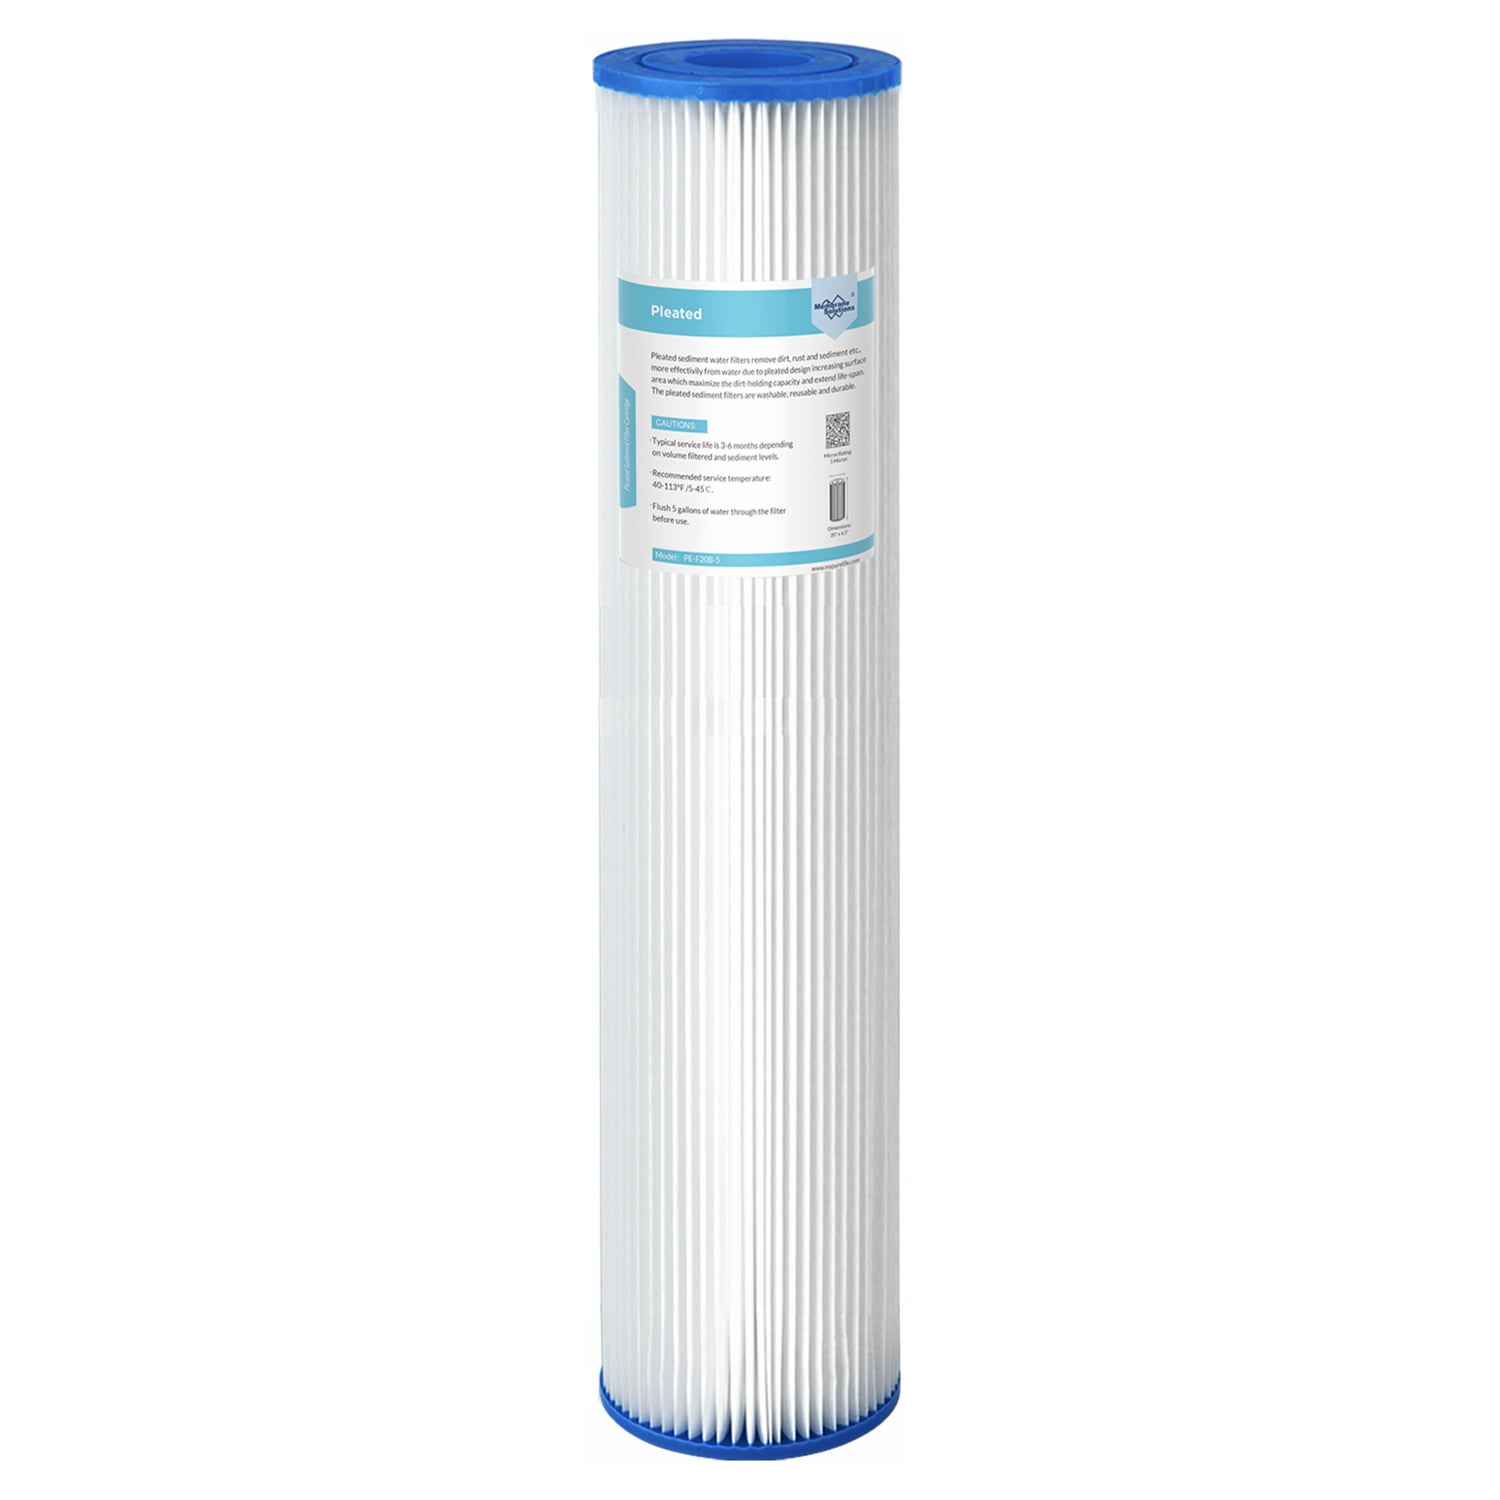 2-PACK of Big Blue 10”x4.5” 1 Micron Sediment Water Filters 